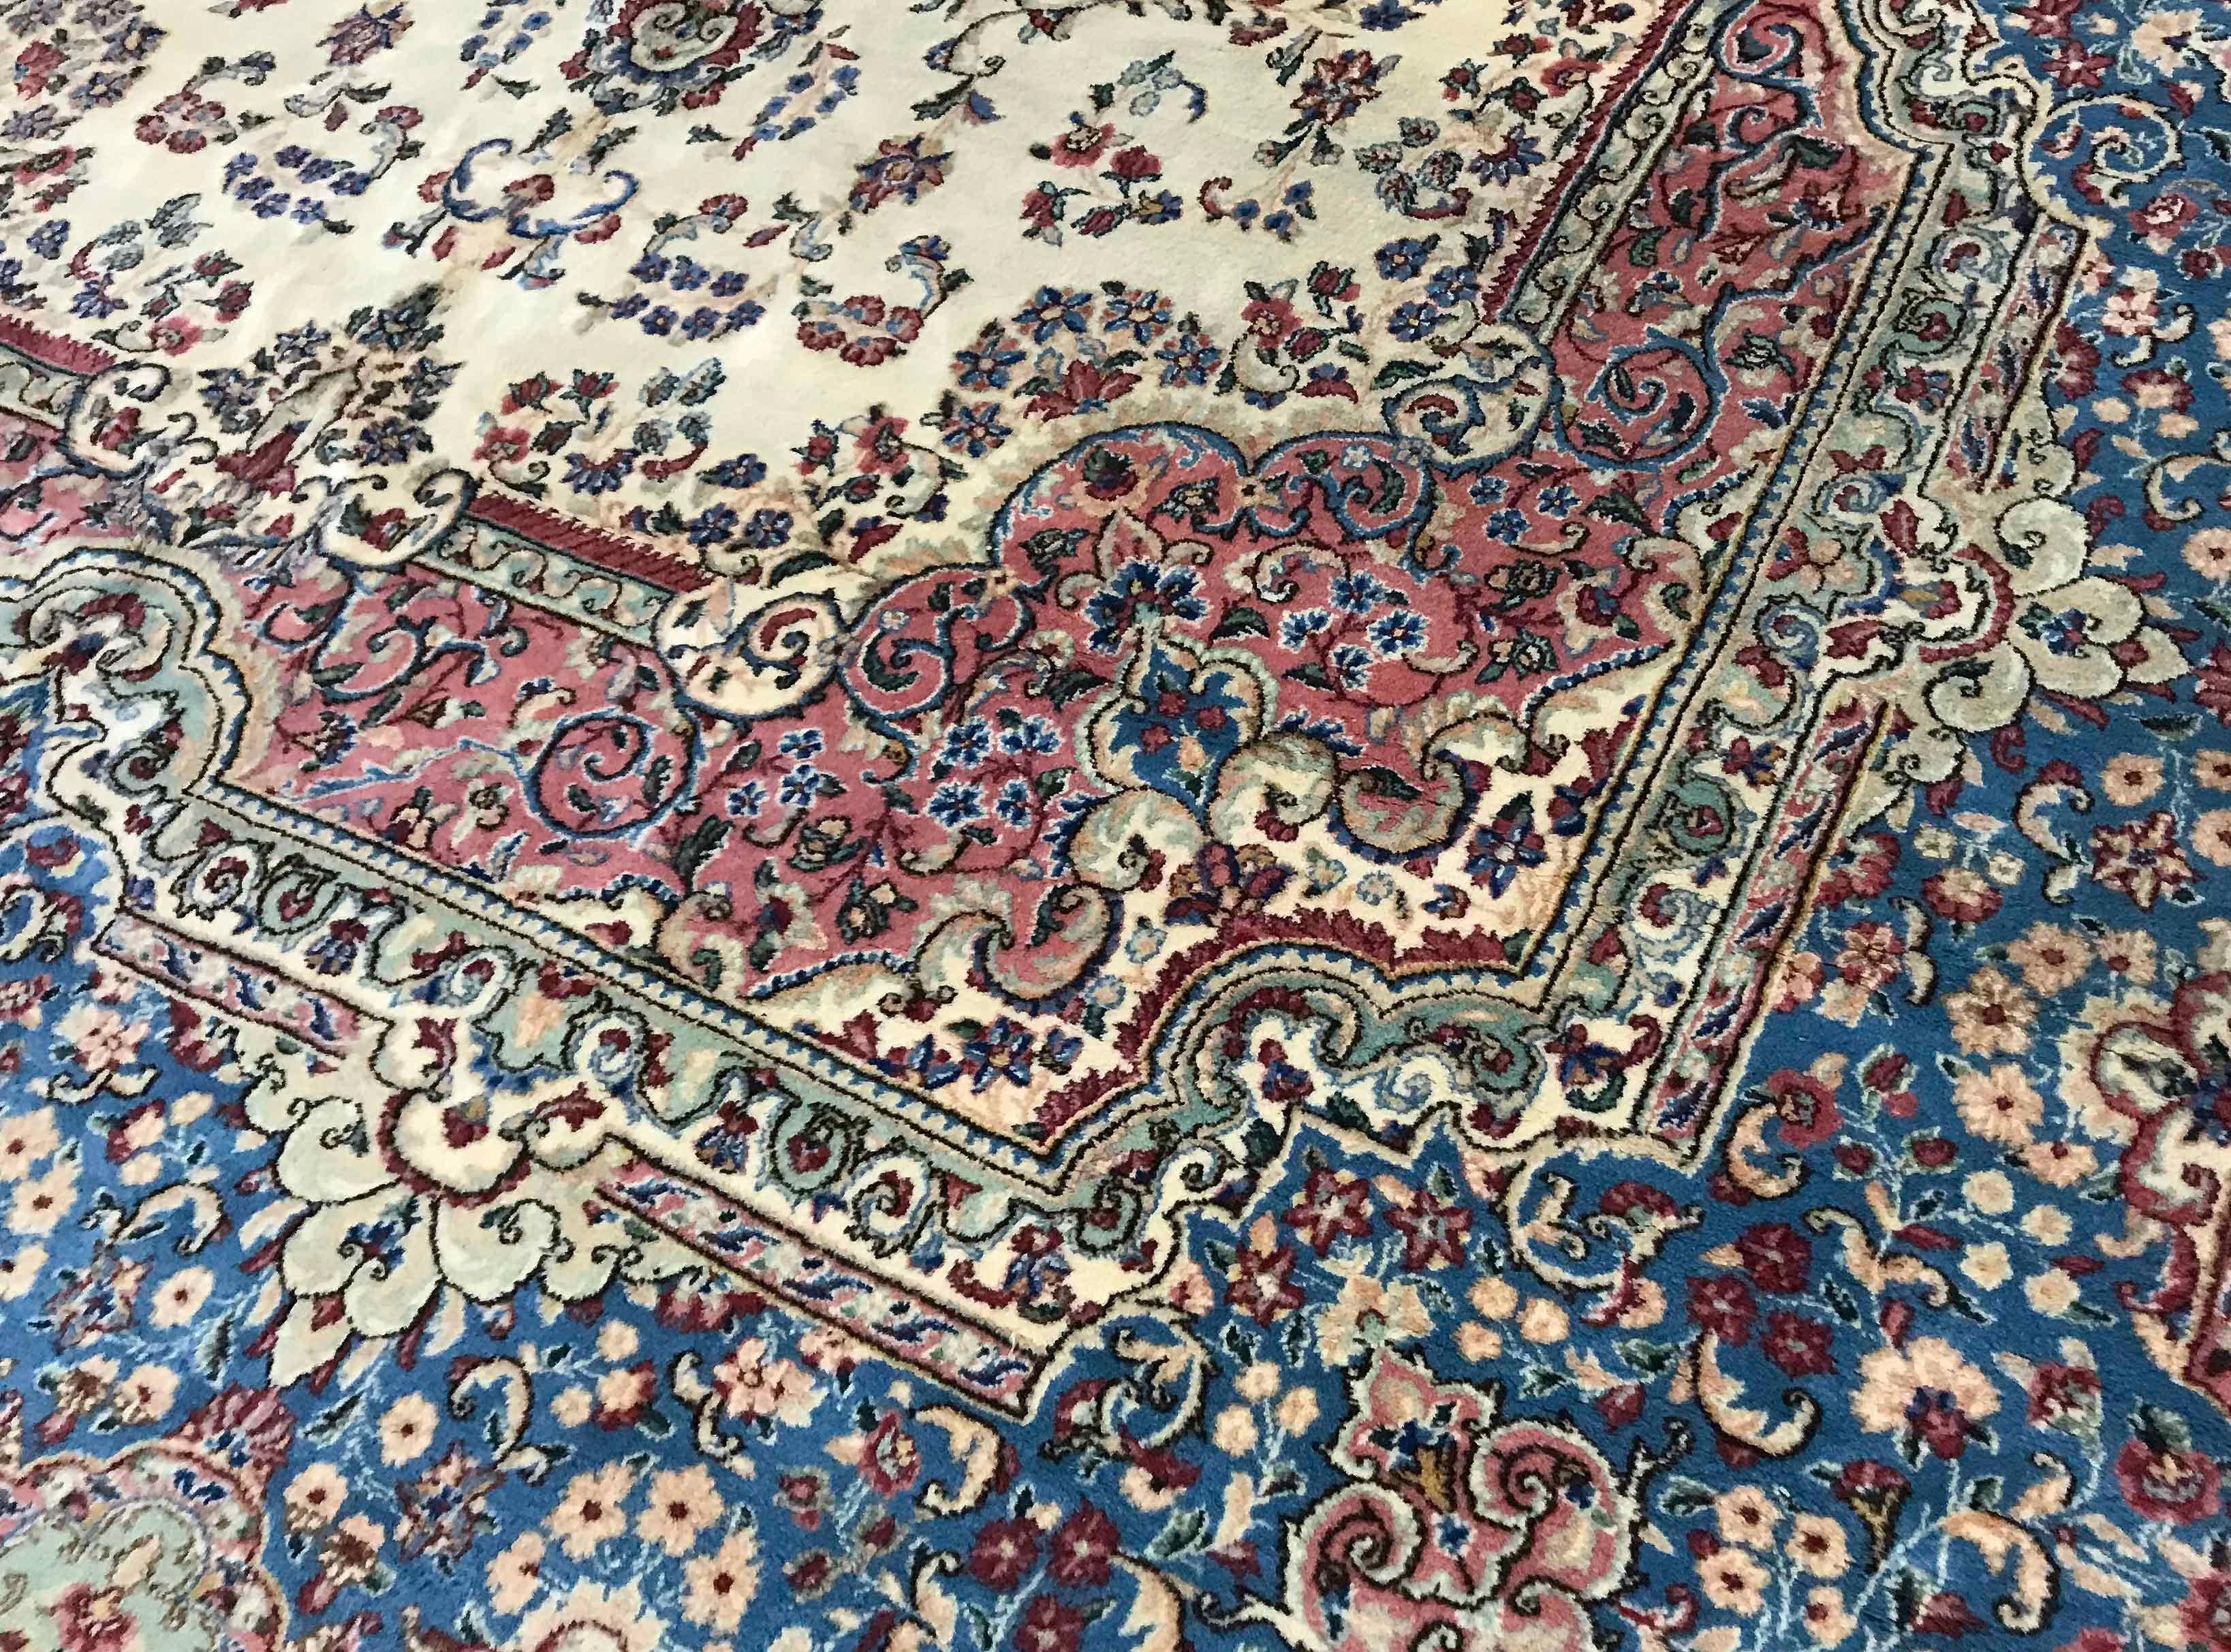 Vintage Persian Kerman, circa 1940. This attractive oversized Kerman has an ivory ground enclosing a central floral design in soft pastel blues with the floral theme surrounding the central field the main border continues the soft blue colors and